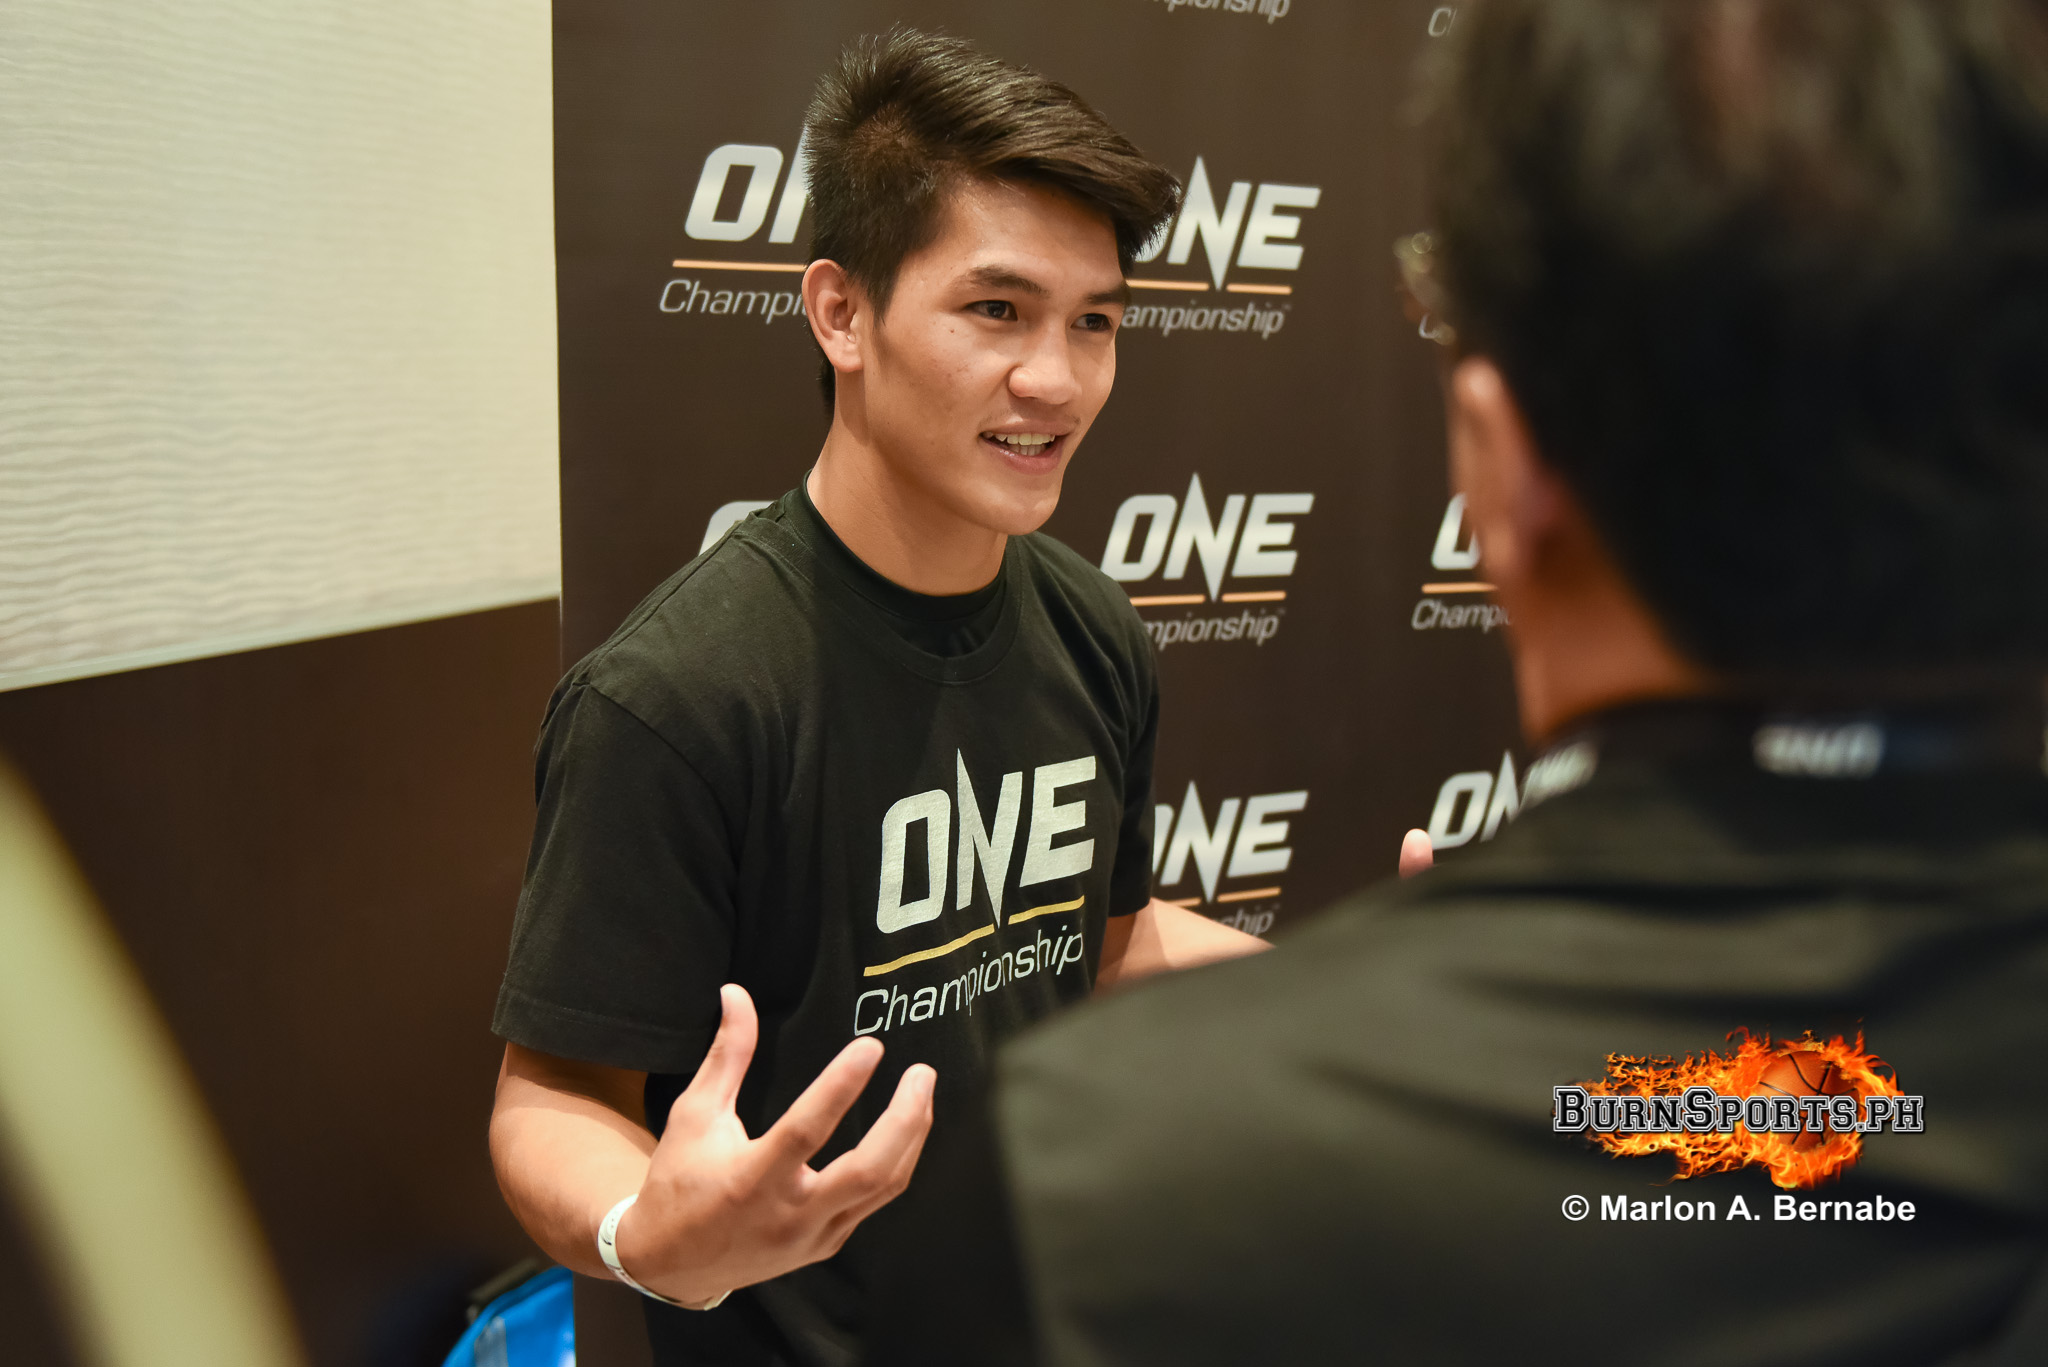 Team Lakay's Danny Kingad: 'I’m going to give my best and win'